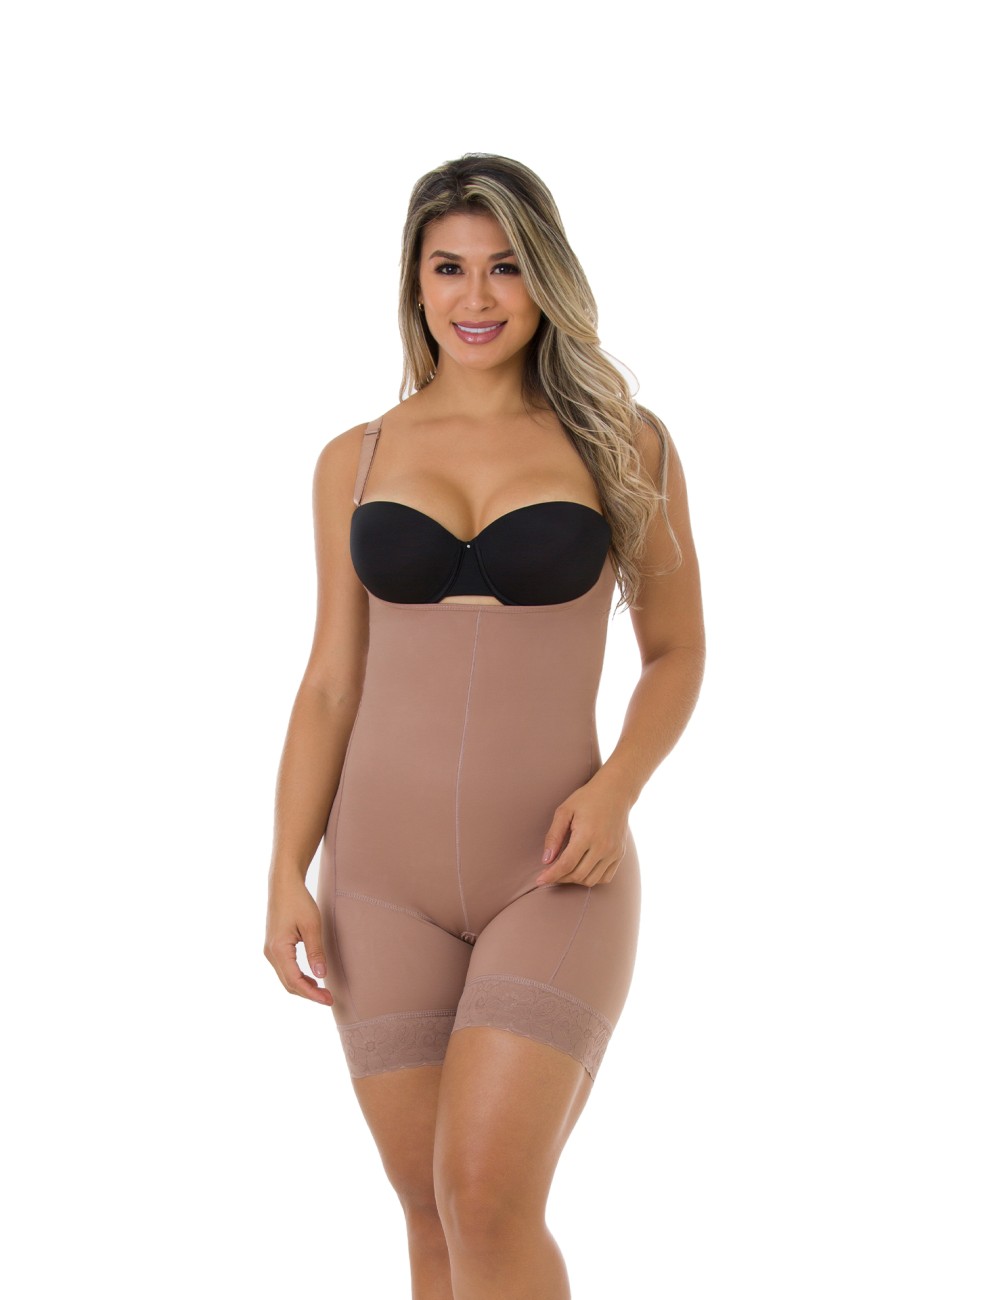 Best Deal for Leonisa invisible compression panty girdle - Tummy control